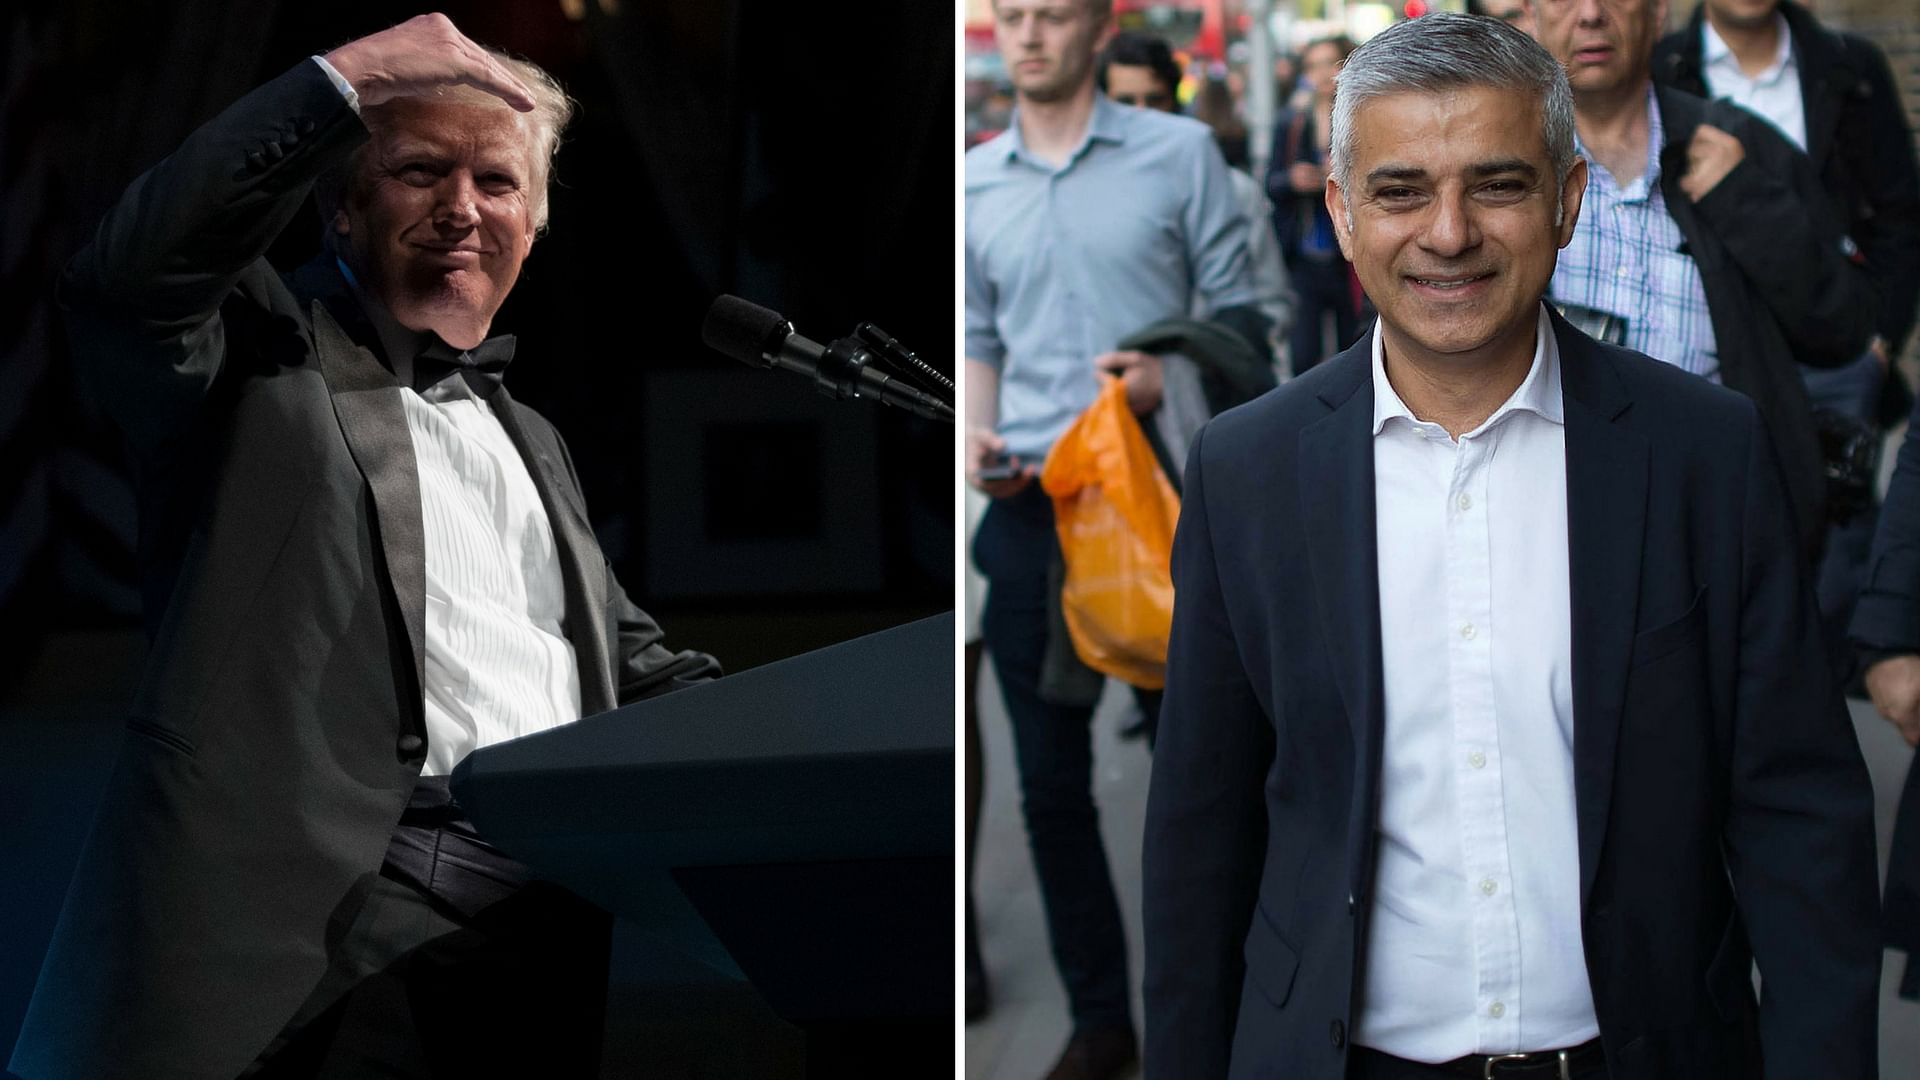 

The conflict between London Mayor Sadiq Khan and US President Donald Trump is a protracted one. (Photo: AP/Reuters)